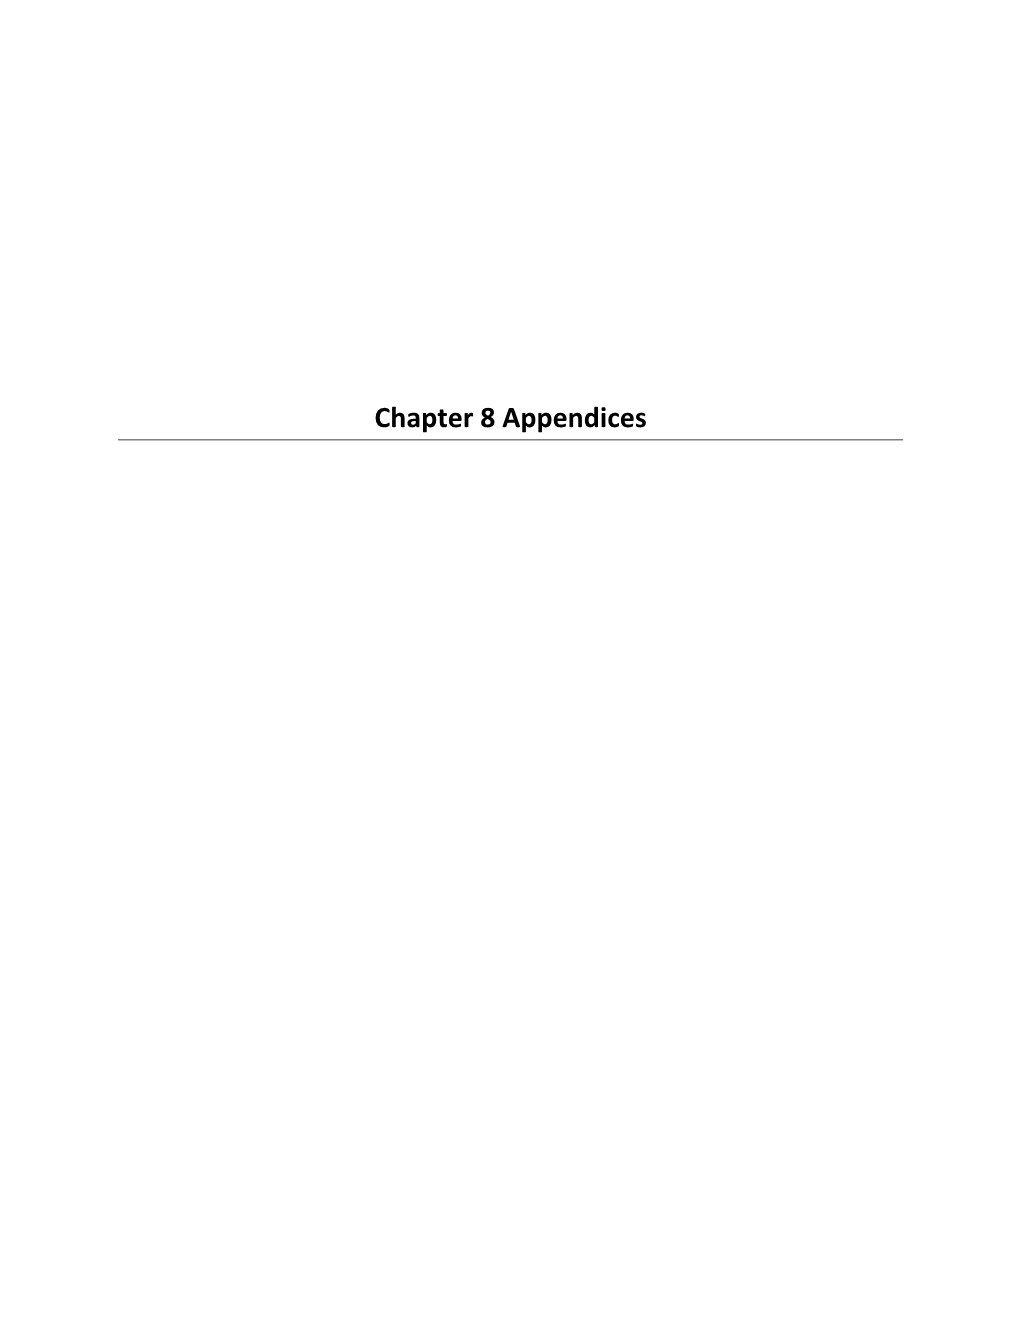 Chapter 8 Appendices